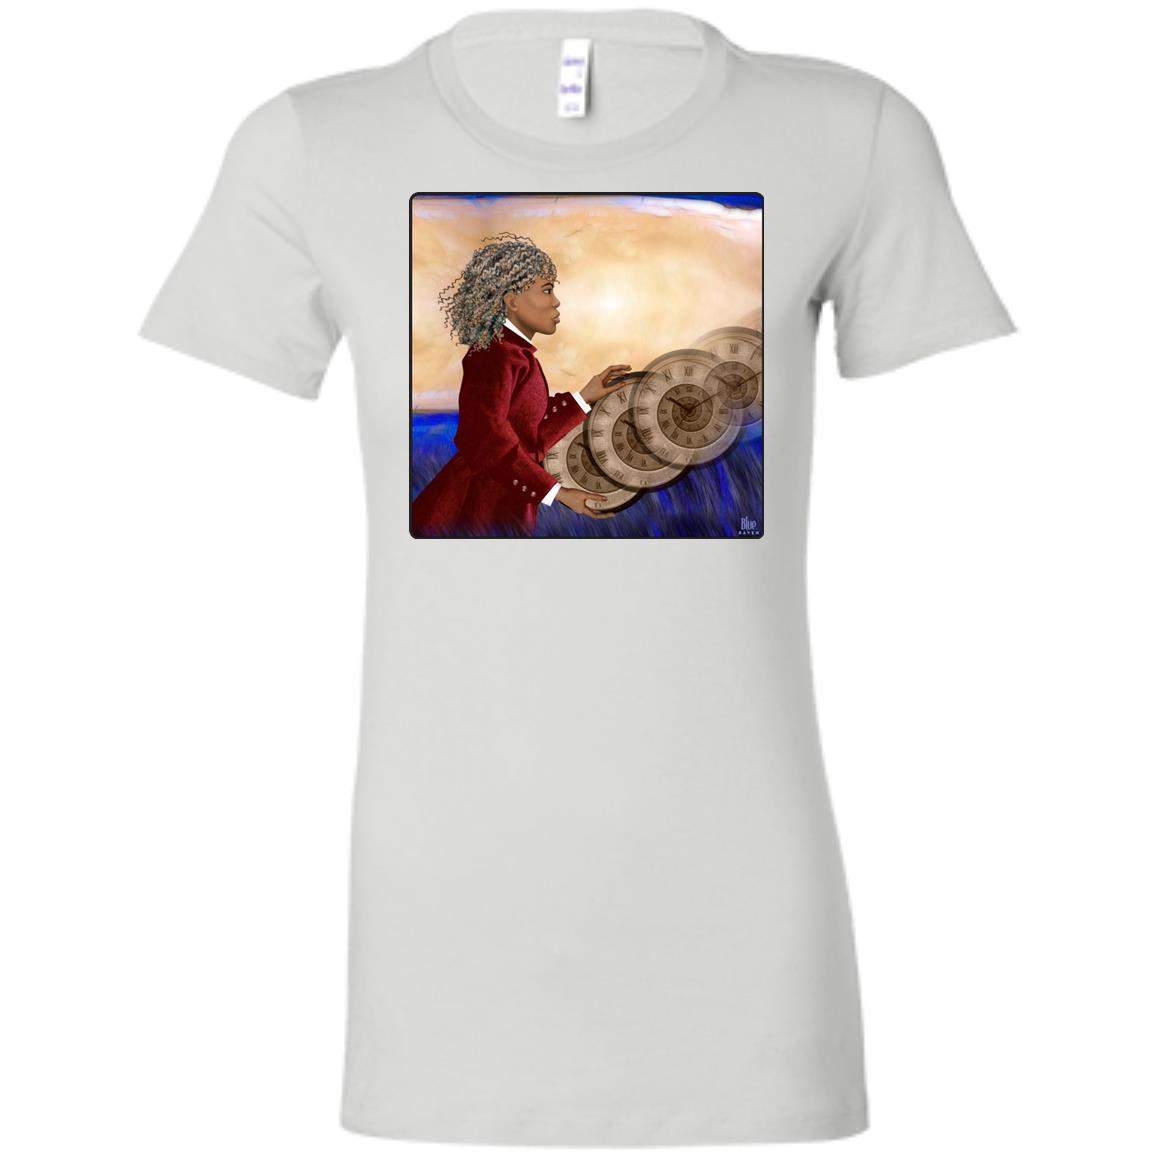 RUSHING TIME - Women's Fitted T-Shirt